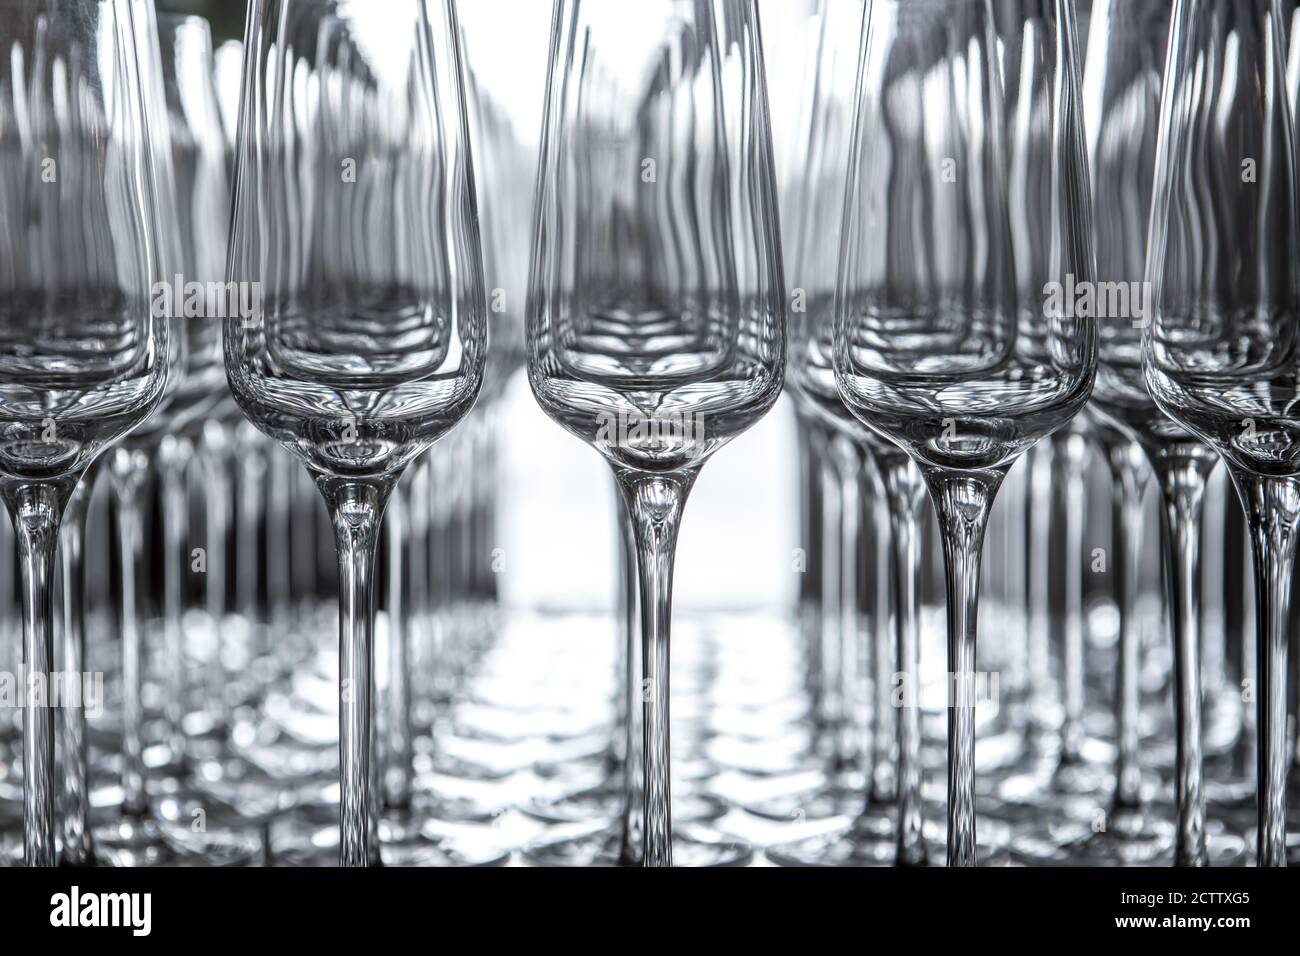 Empty glass glasses for sparkling wine in the light Stock Photo